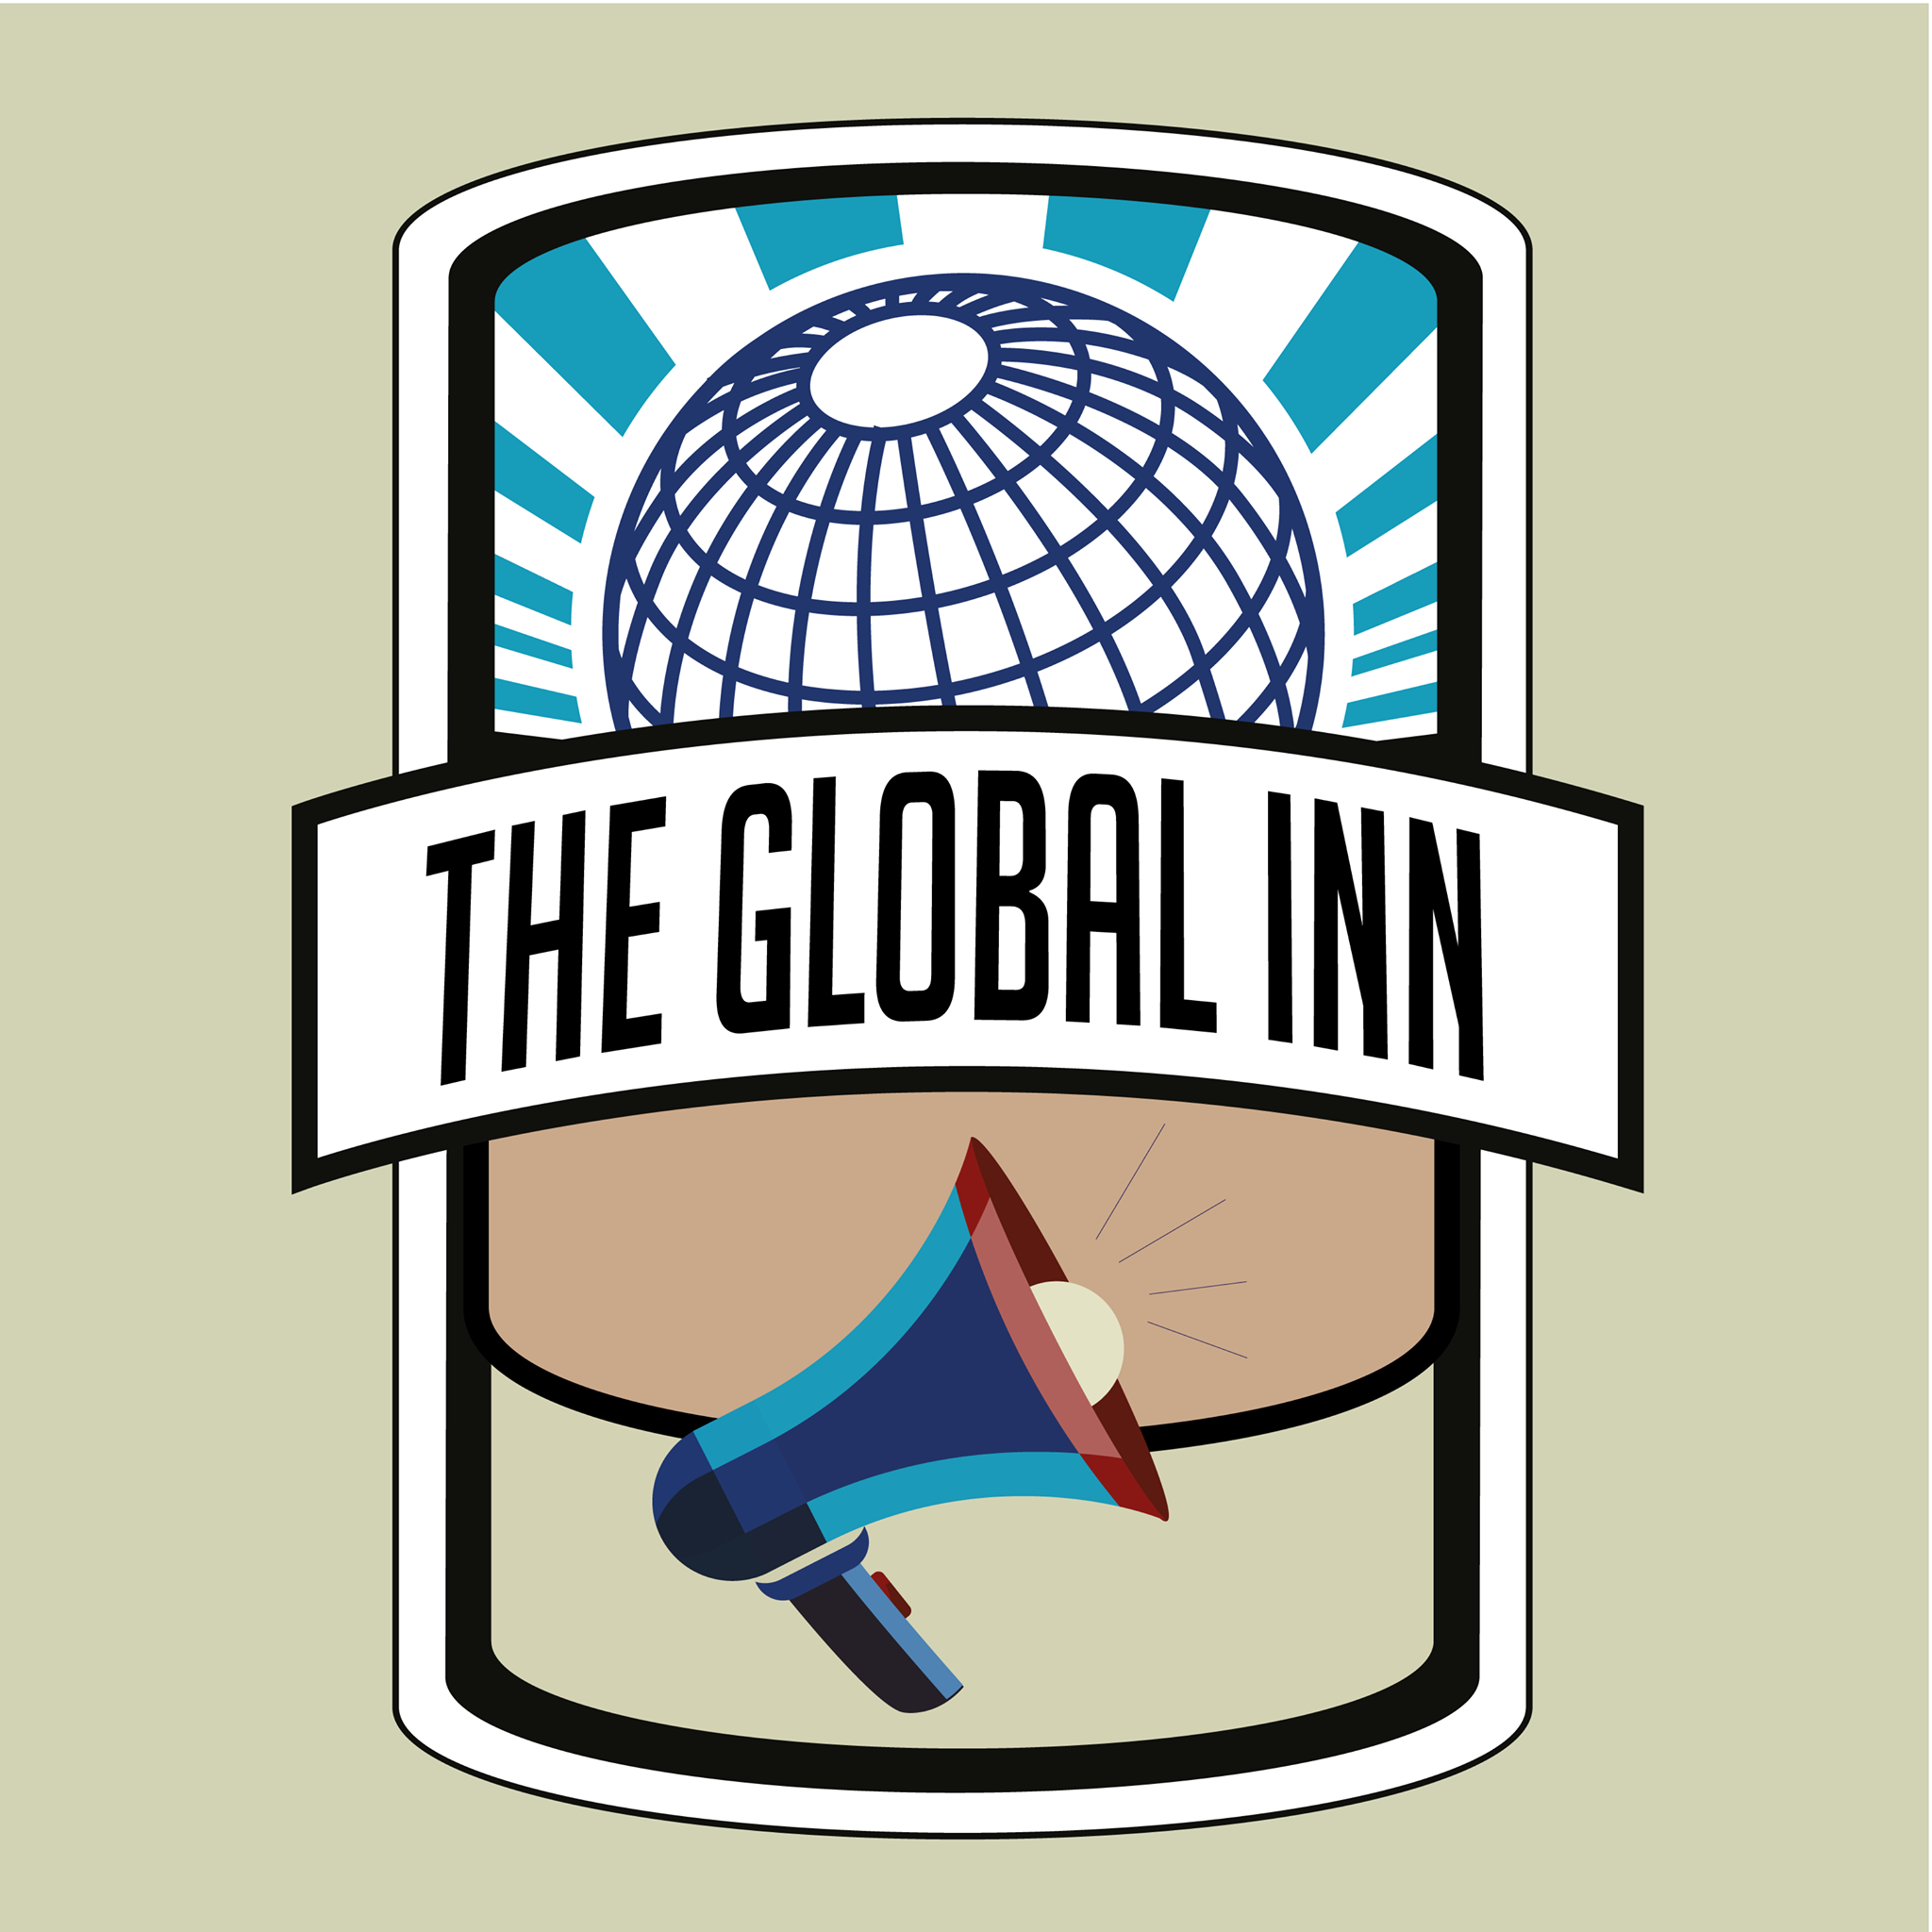 New podcast episode from The Global Inn!